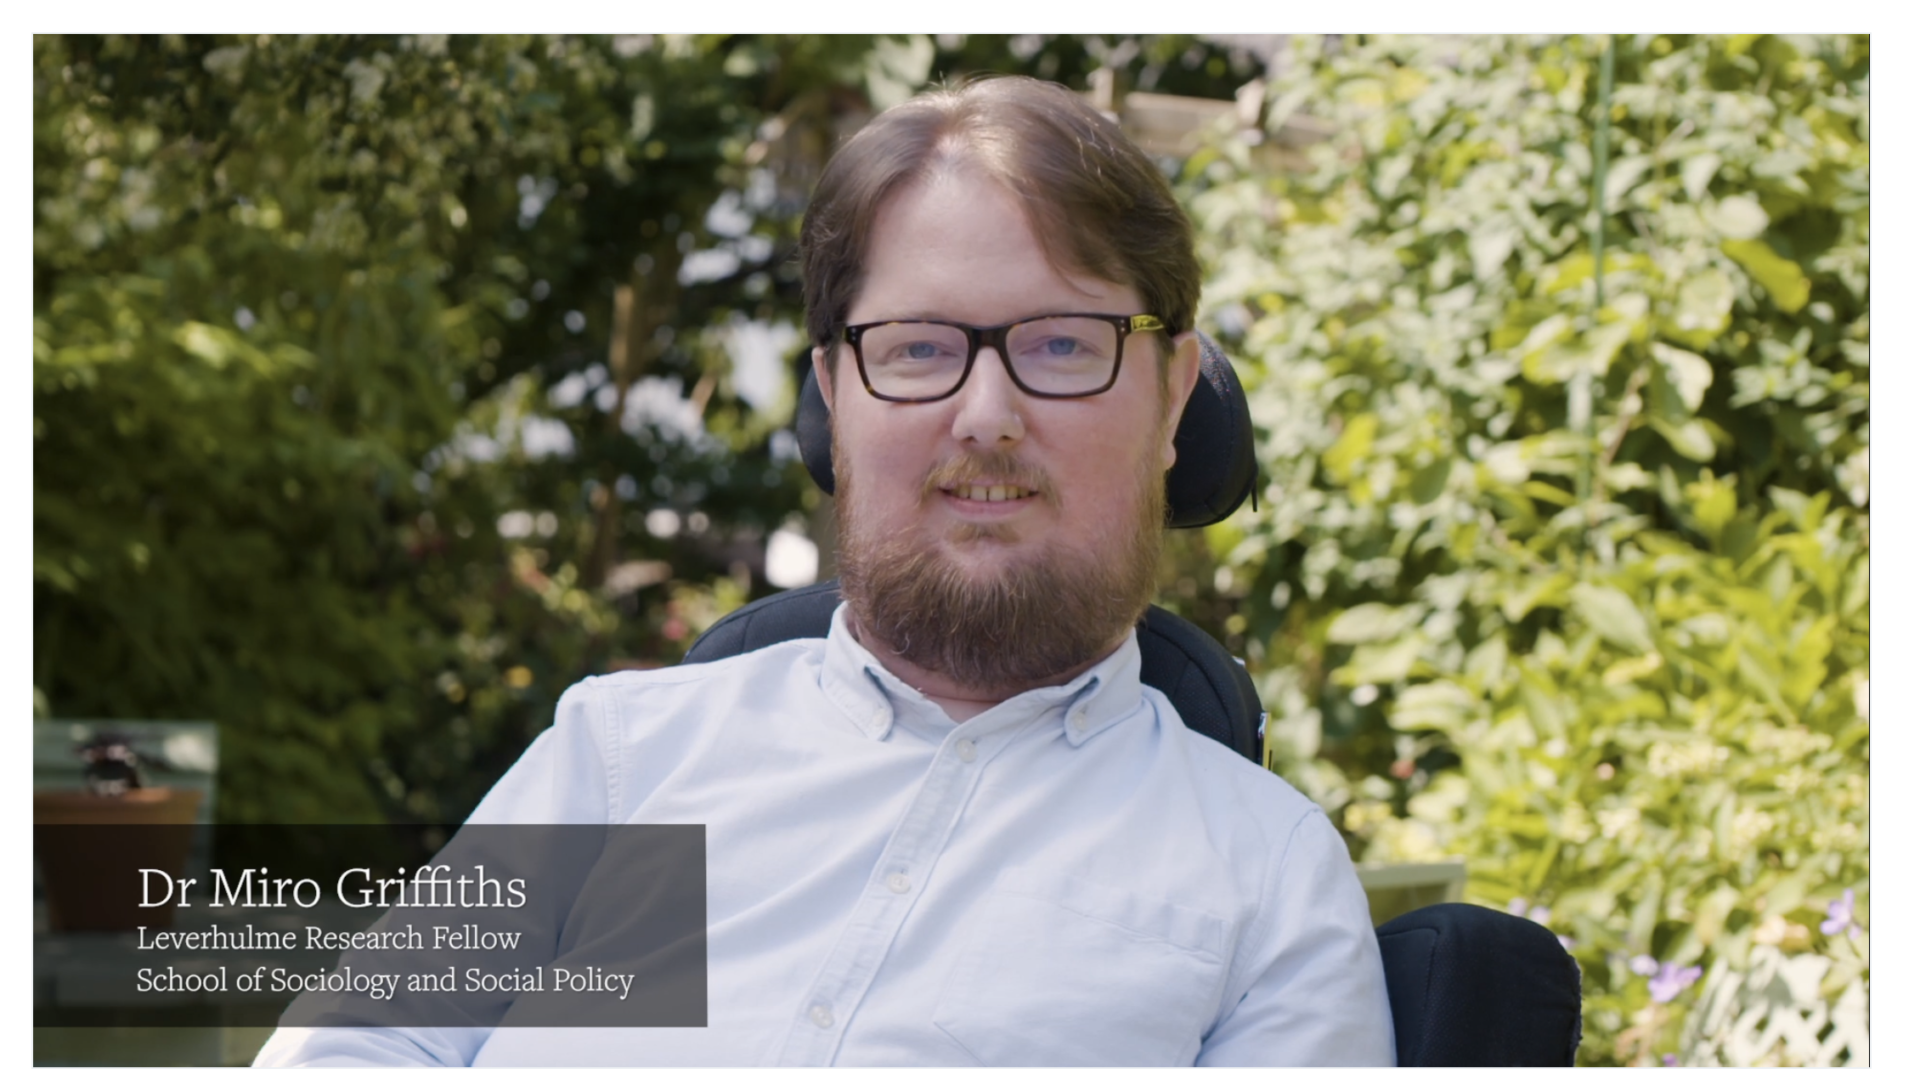 Dr Miro Griffiths needs accessible documents and websites for all his work